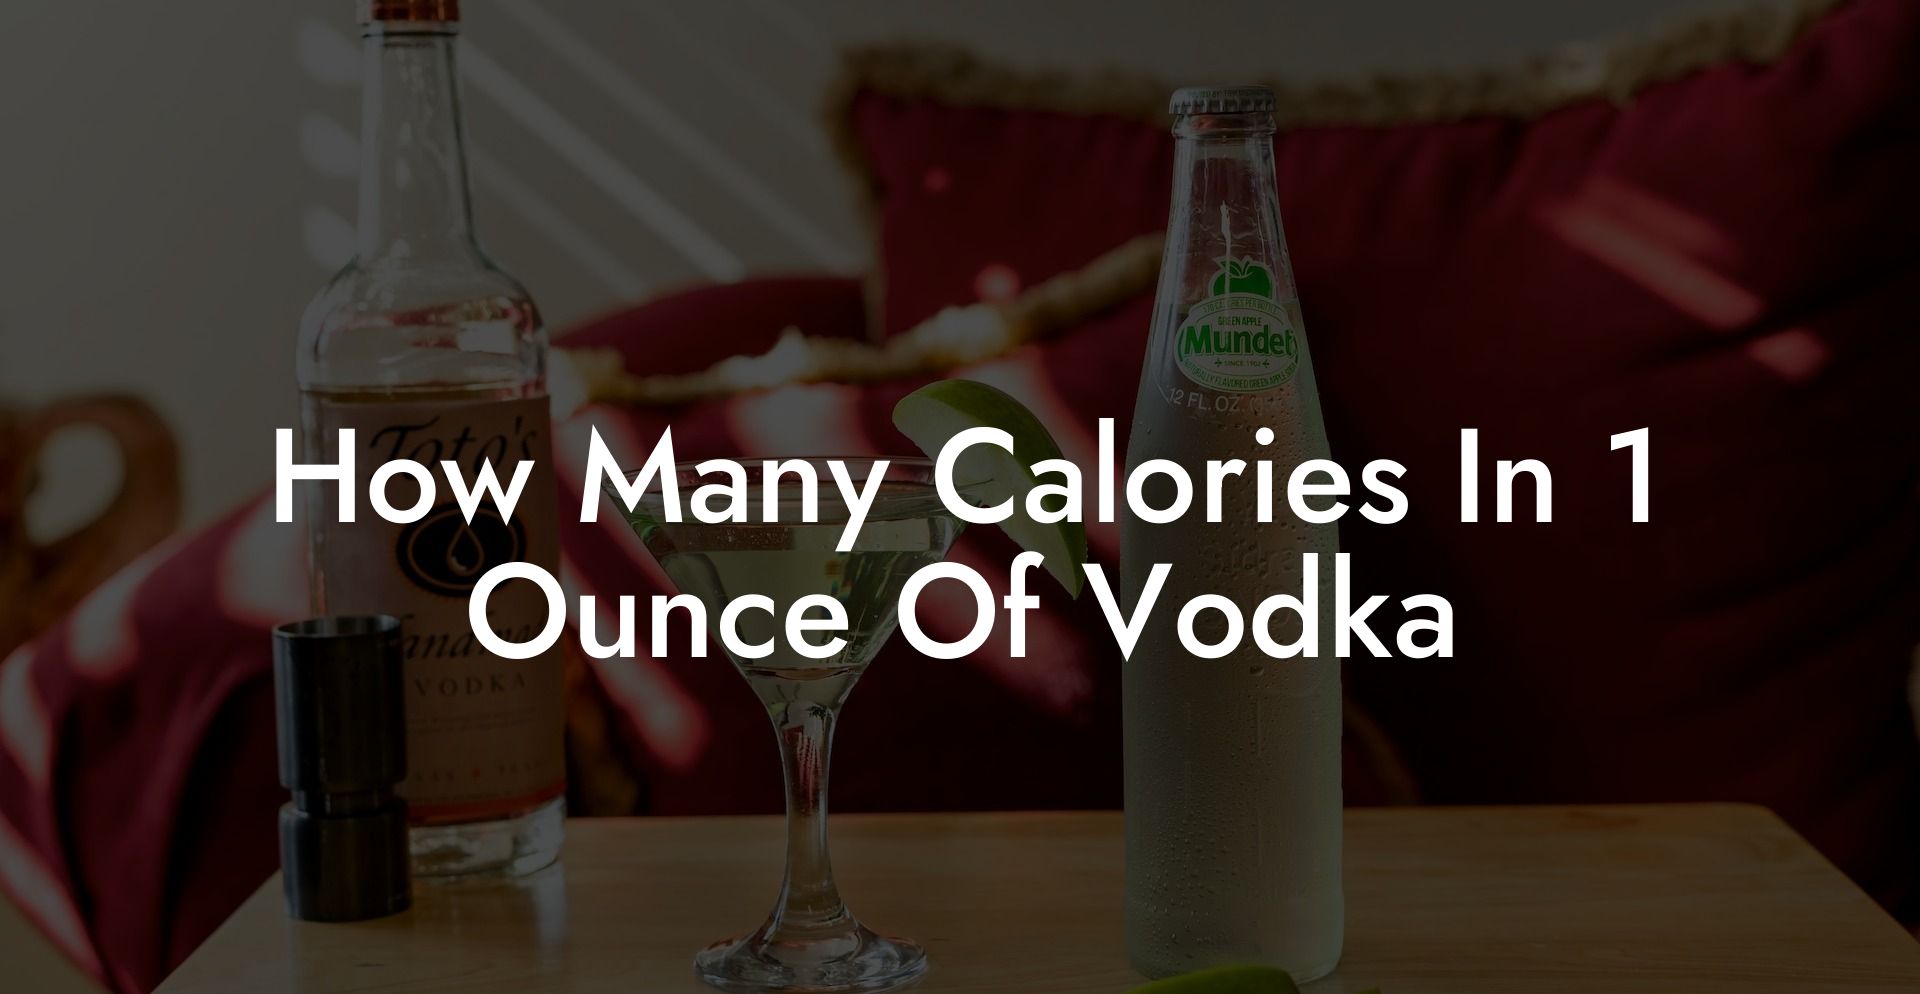 How Many Calories In 1 Ounce Of Vodka